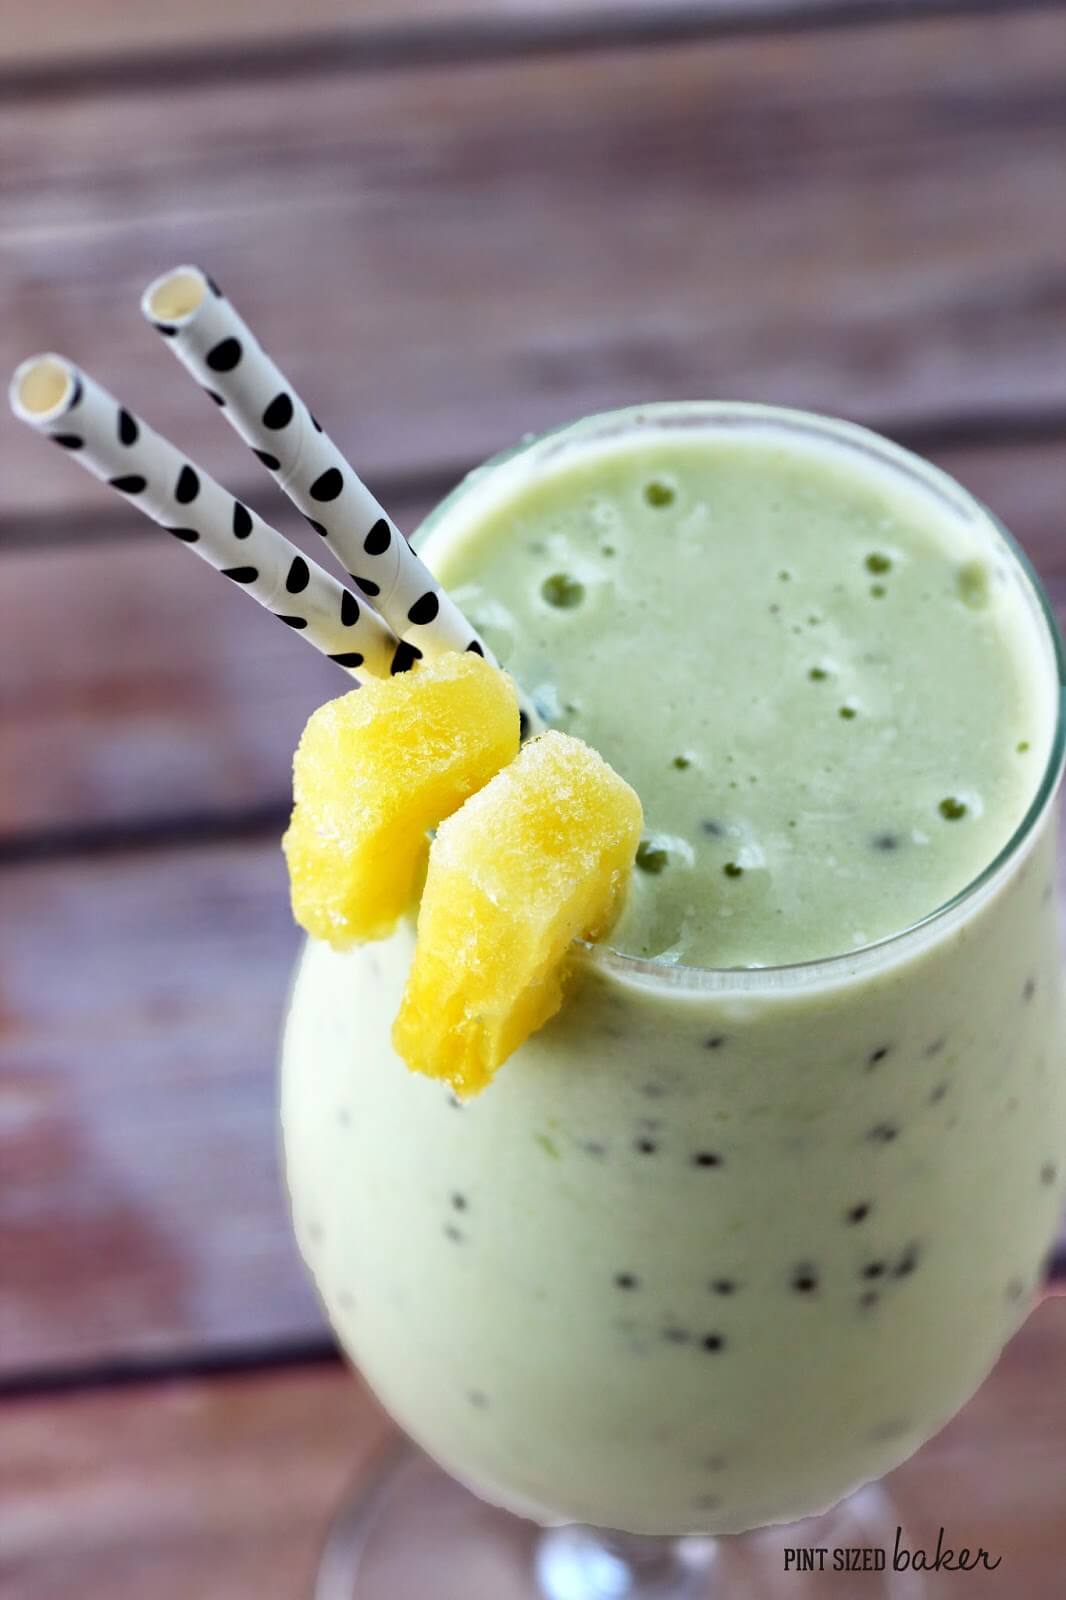 Make this Pineapple and Kiwiberry Protein Smoothie for a great summer breakfast. Look for Kiwiberries in a clam box at your local grocery store.